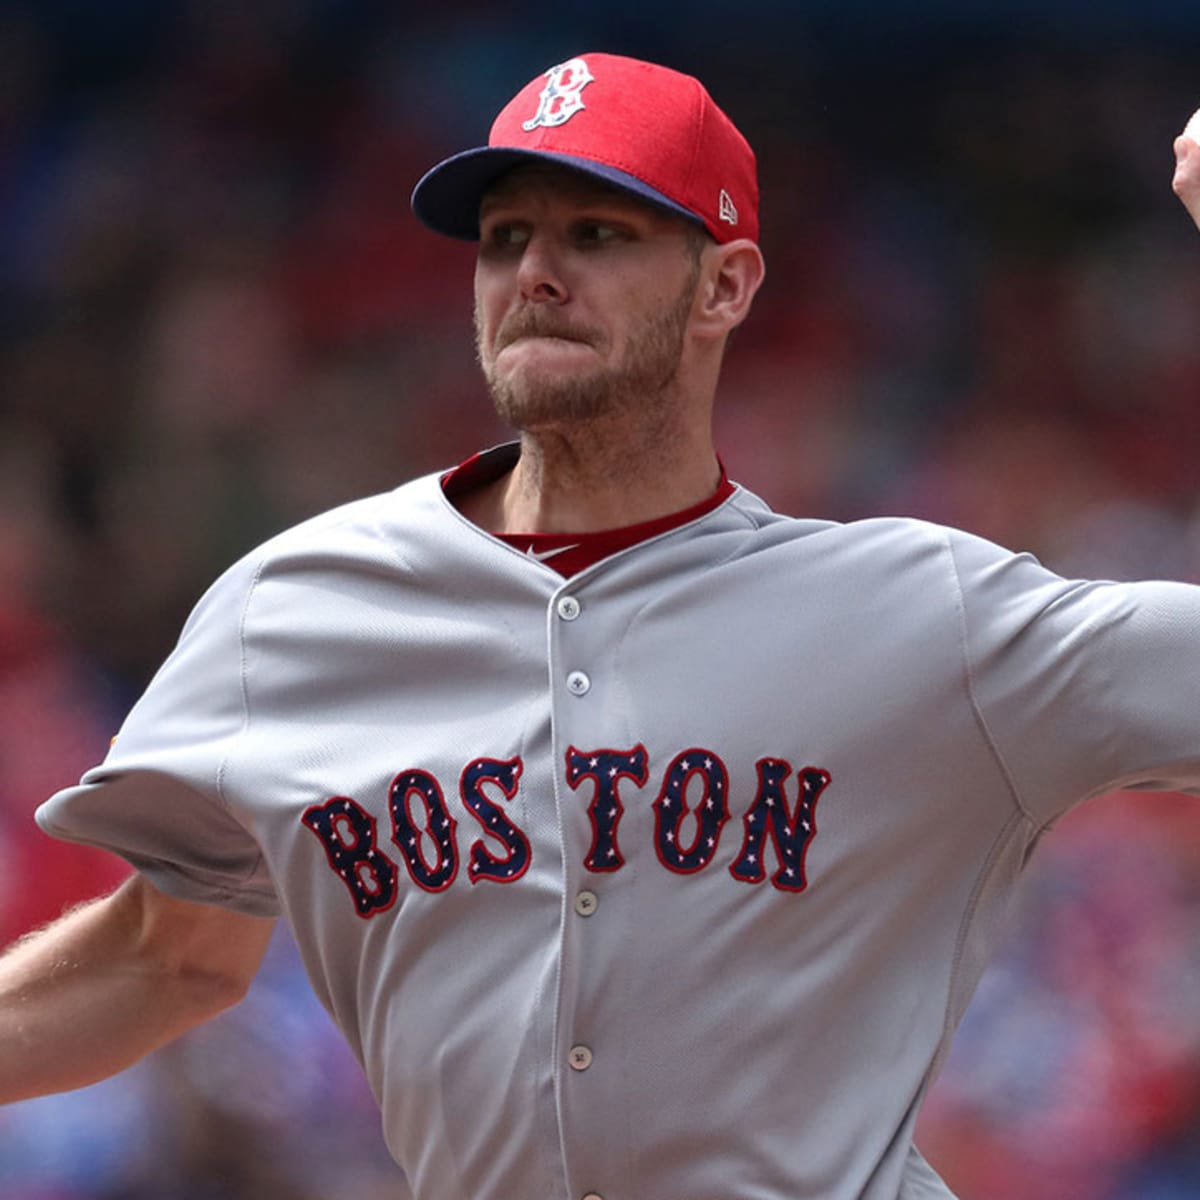 MLB All-Star Game: Max Scherzer & Chris Sale are the starting pitchers 